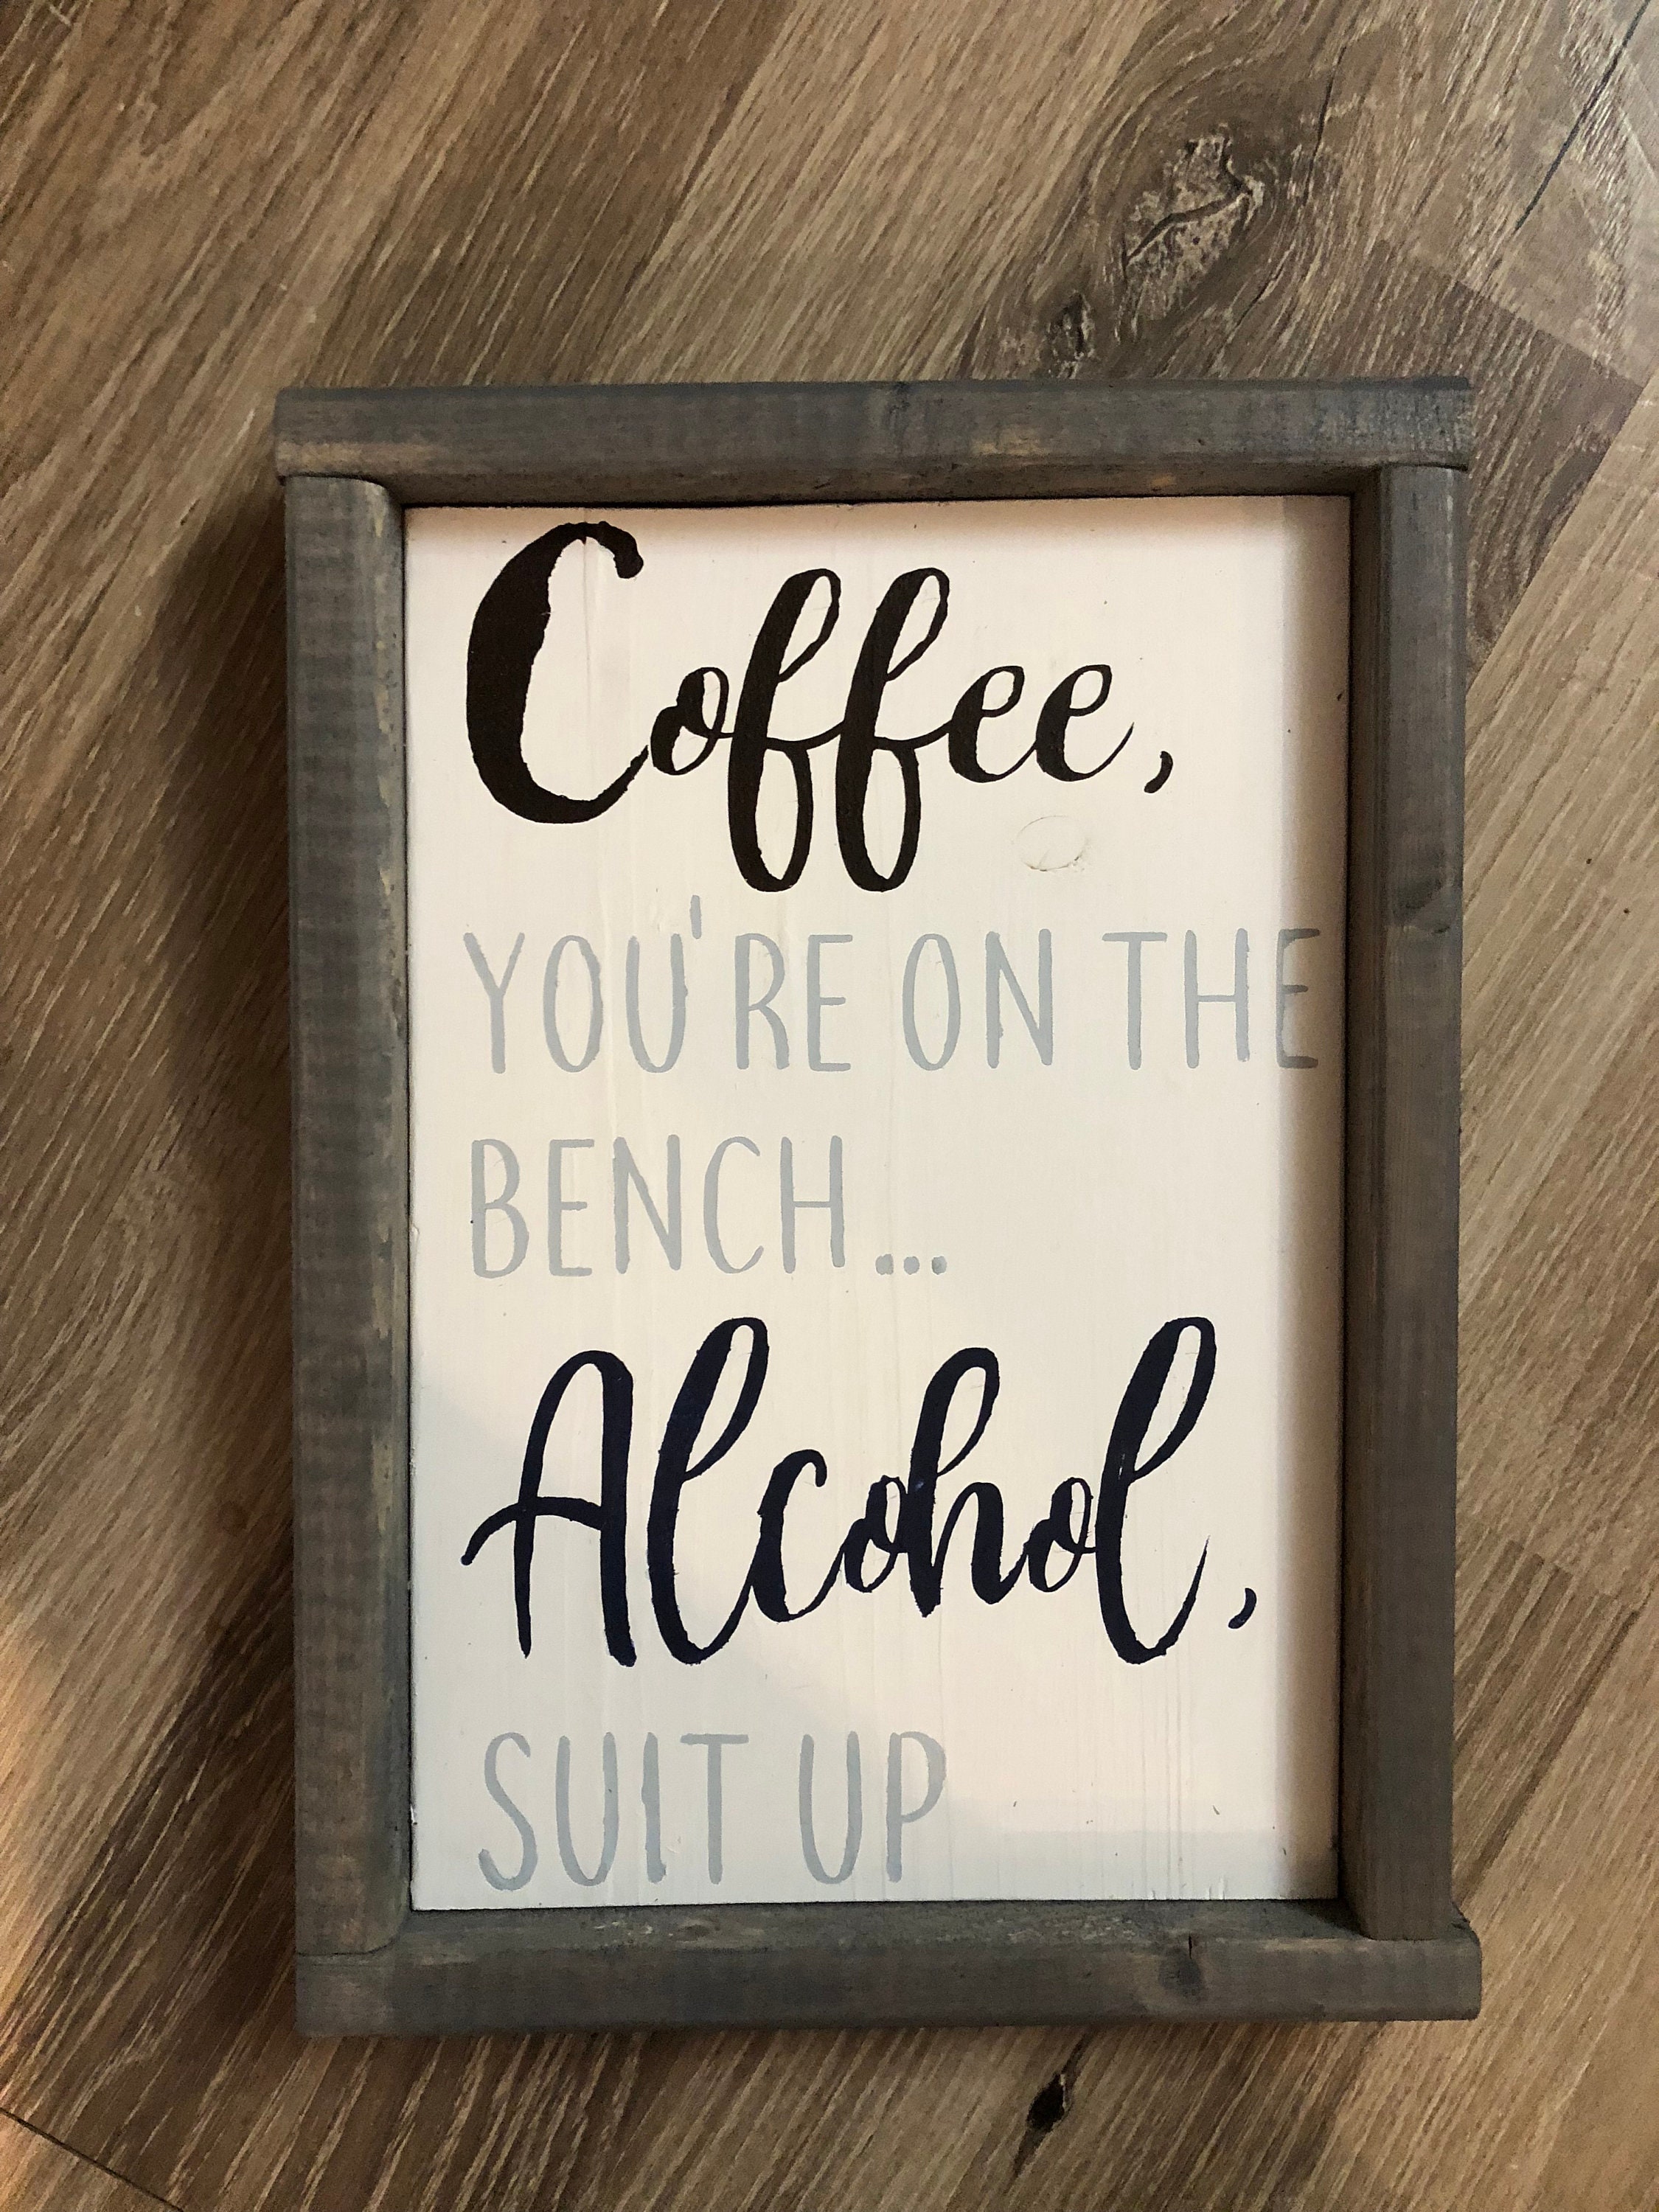 Coffee, You're on the Bench, Alcohol Suit Up. Funny Wood Decor